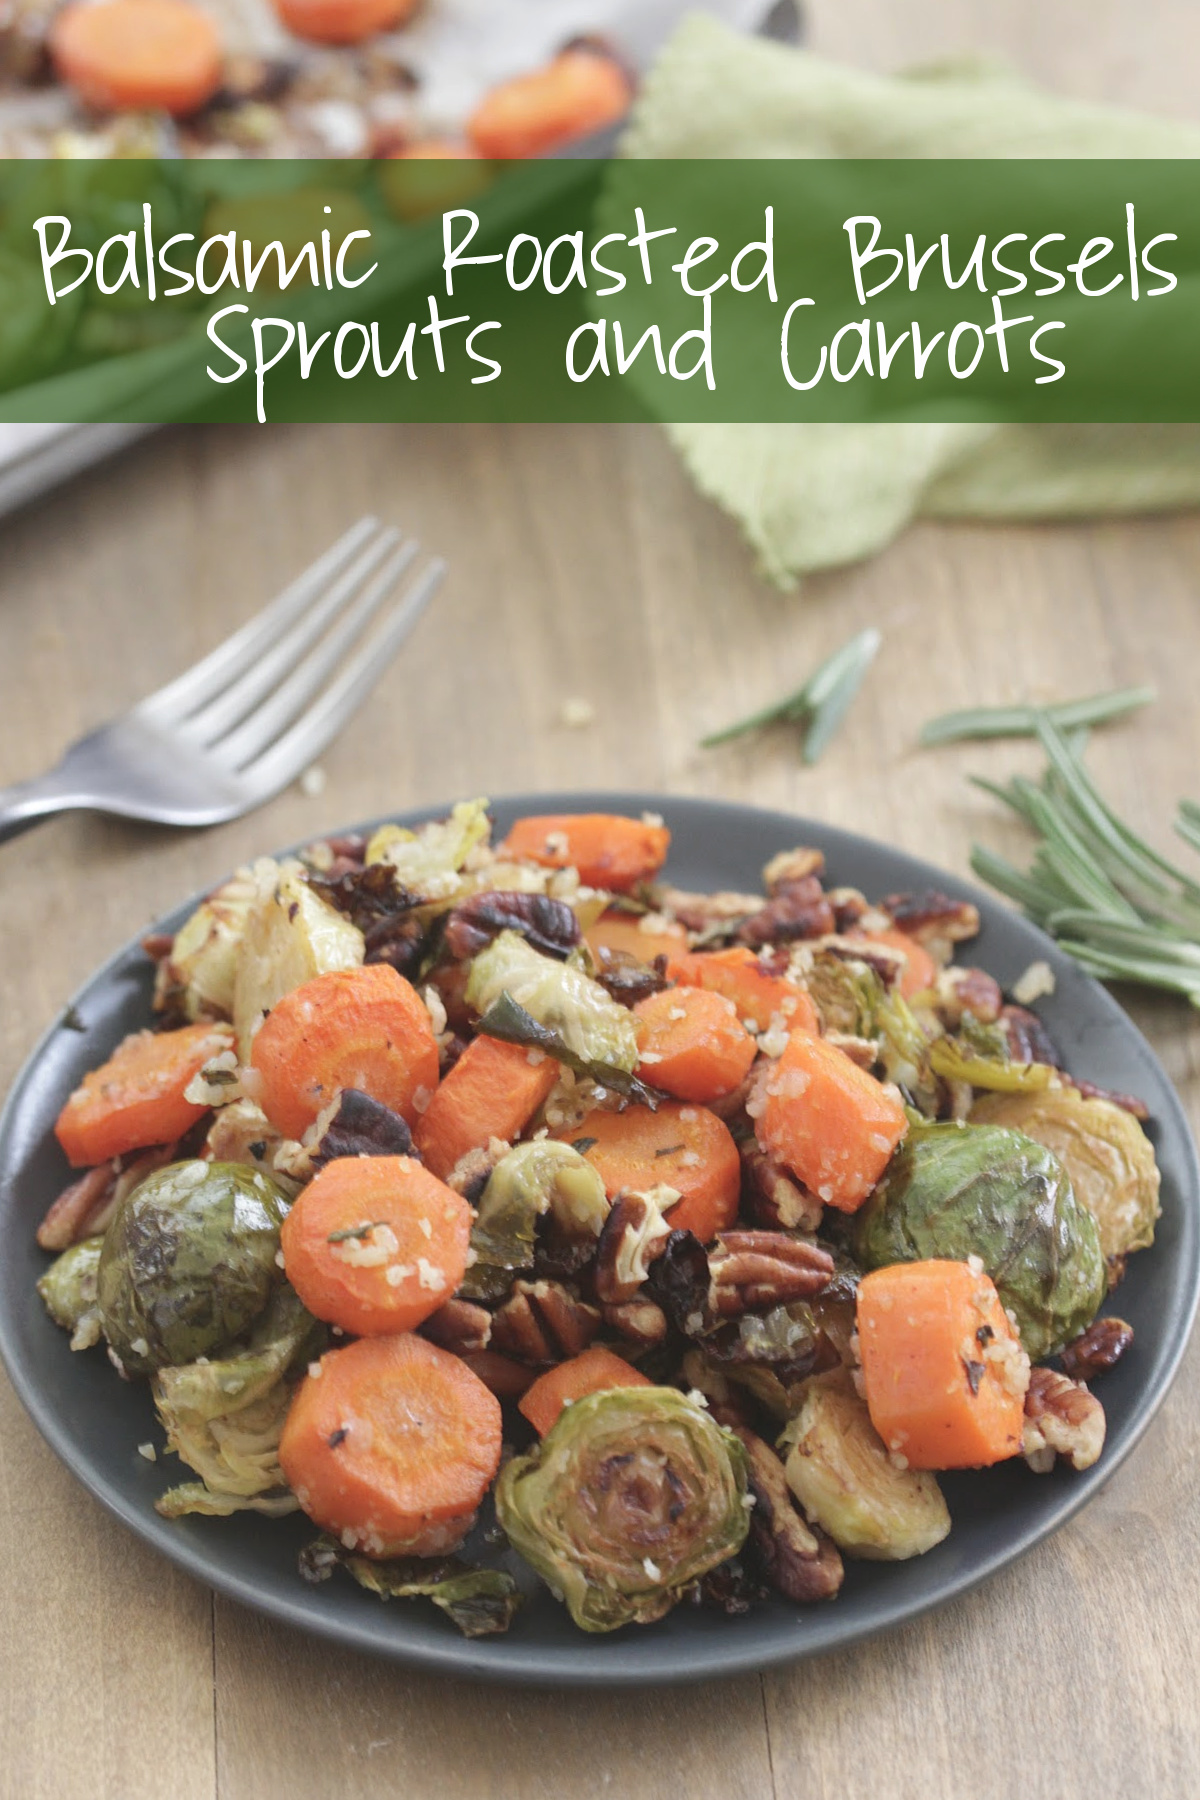 Balsamic Roasted Brussels Sprouts and Carrots